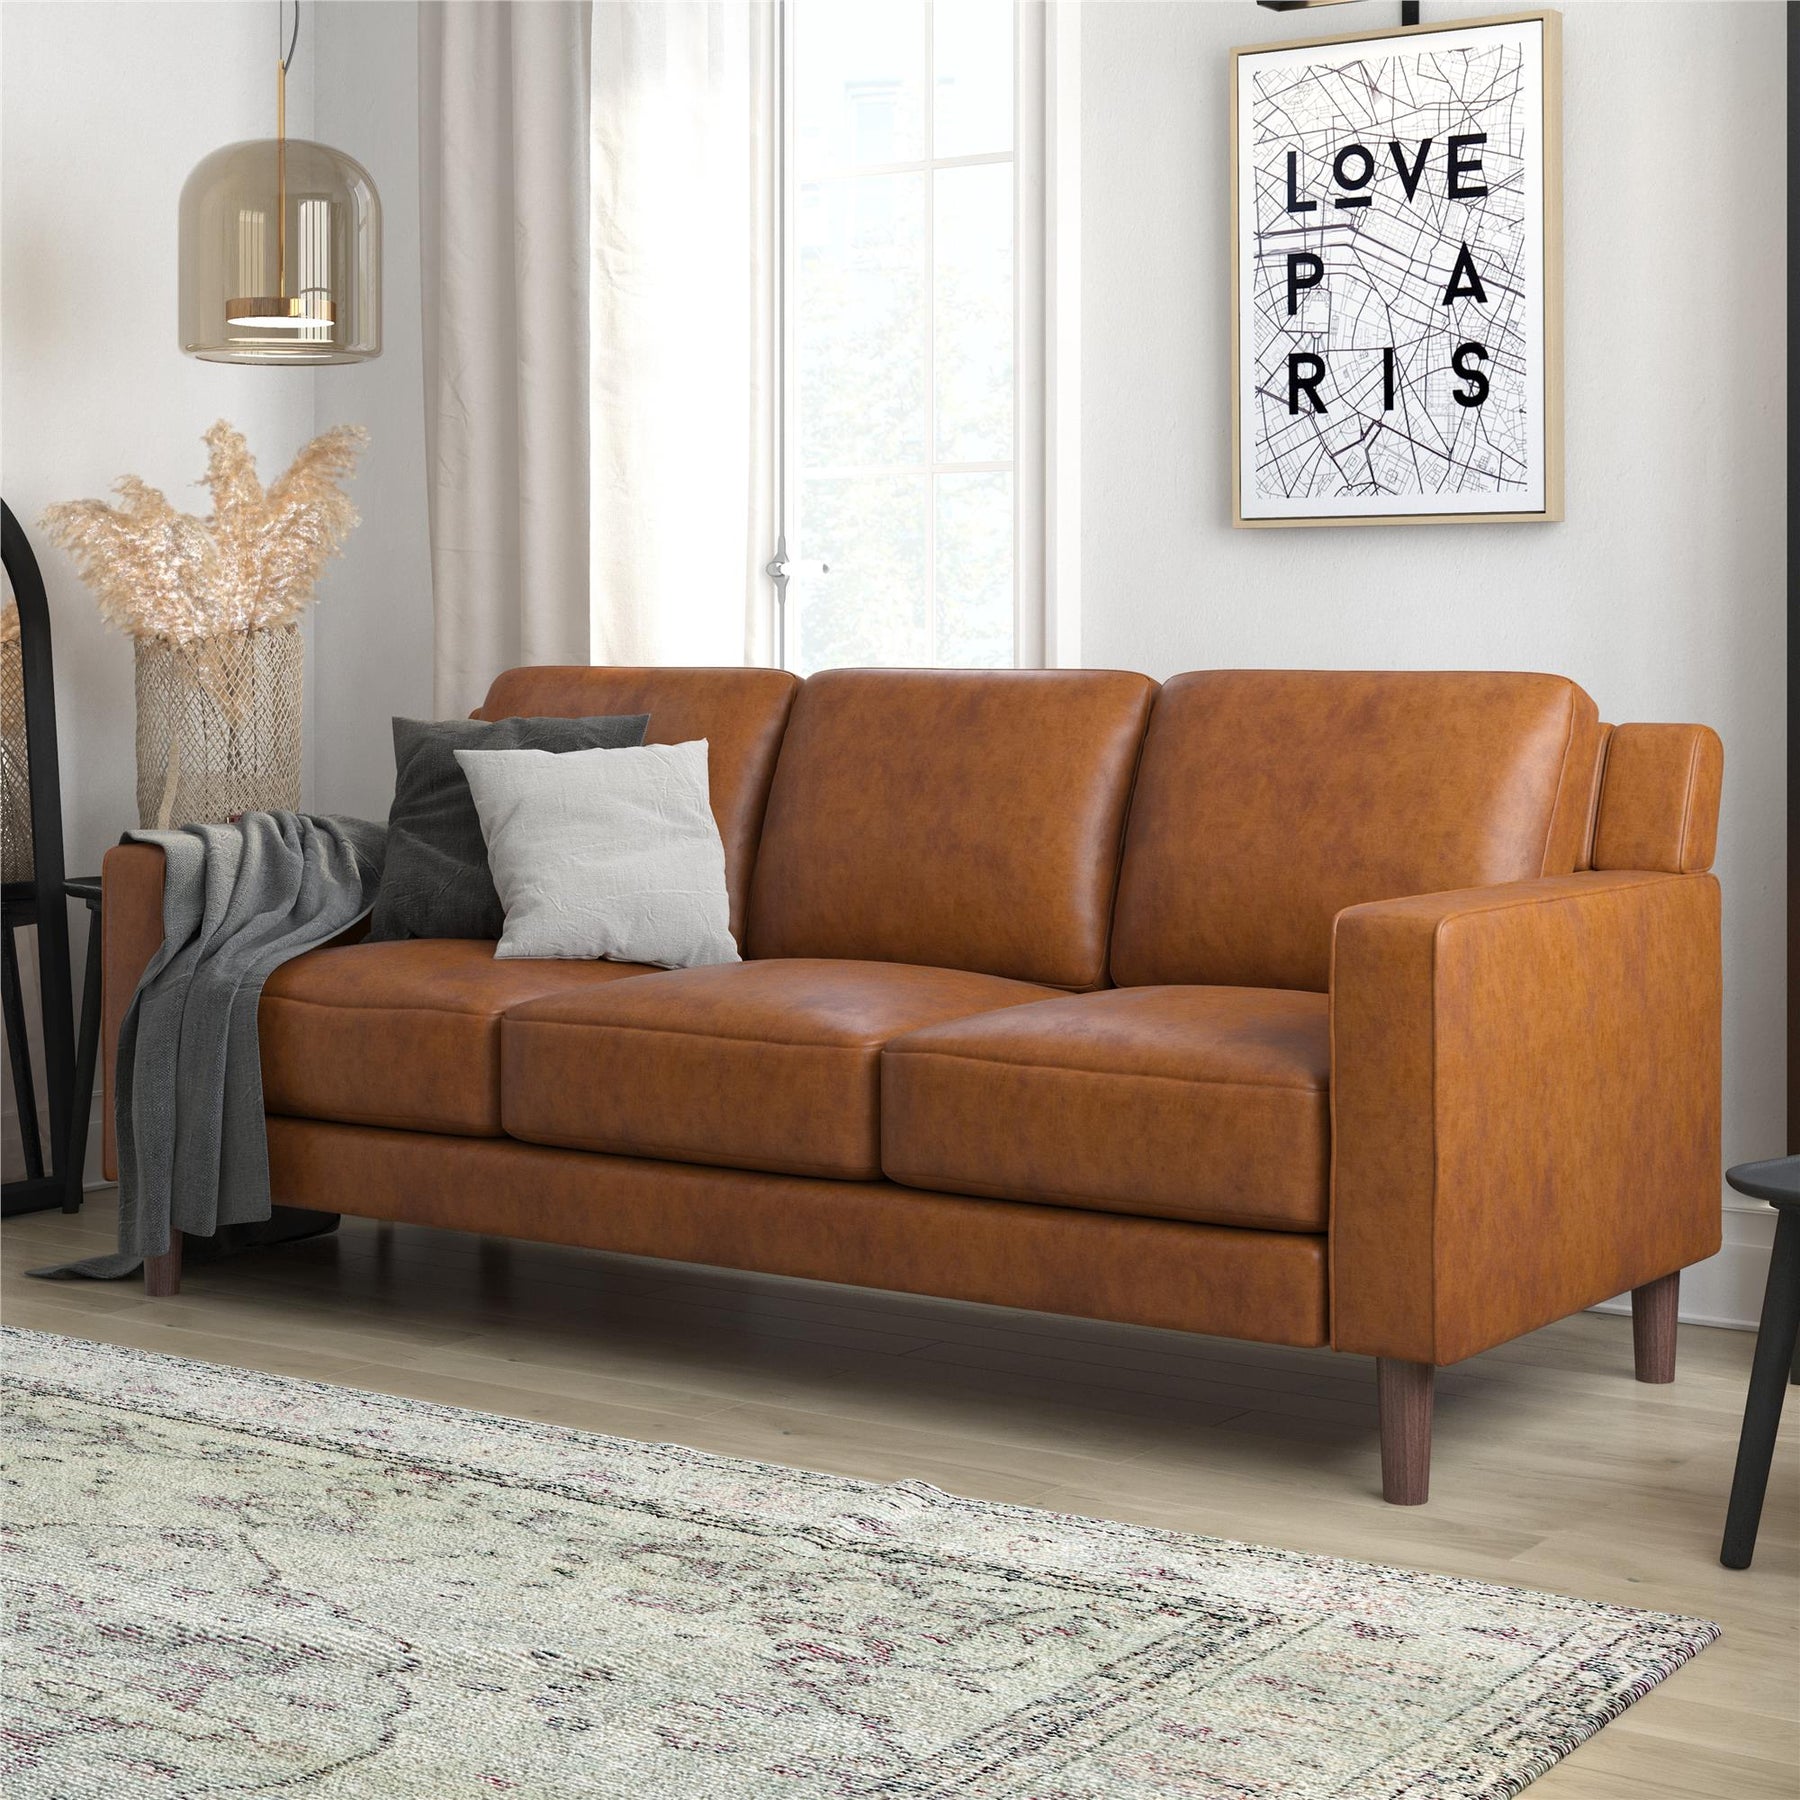 Brynn Fabric Upholstered 3 Seater Sofa with Wooden Legs – RealRooms